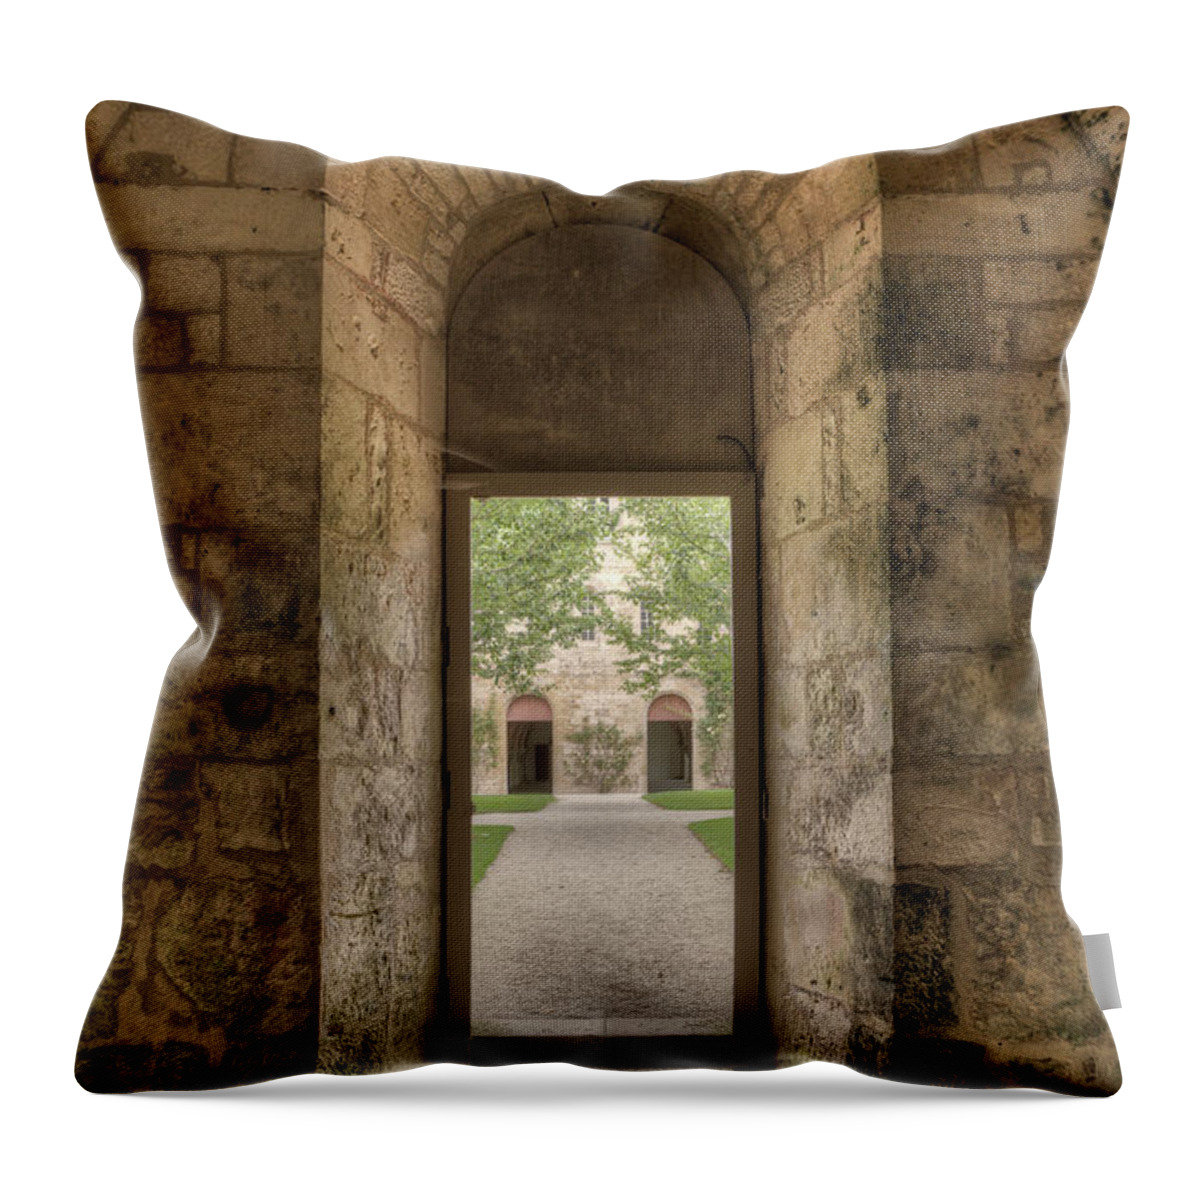 Design Throw Pillow featuring the digital art Inside Out by Jean-Pierre Ducondi